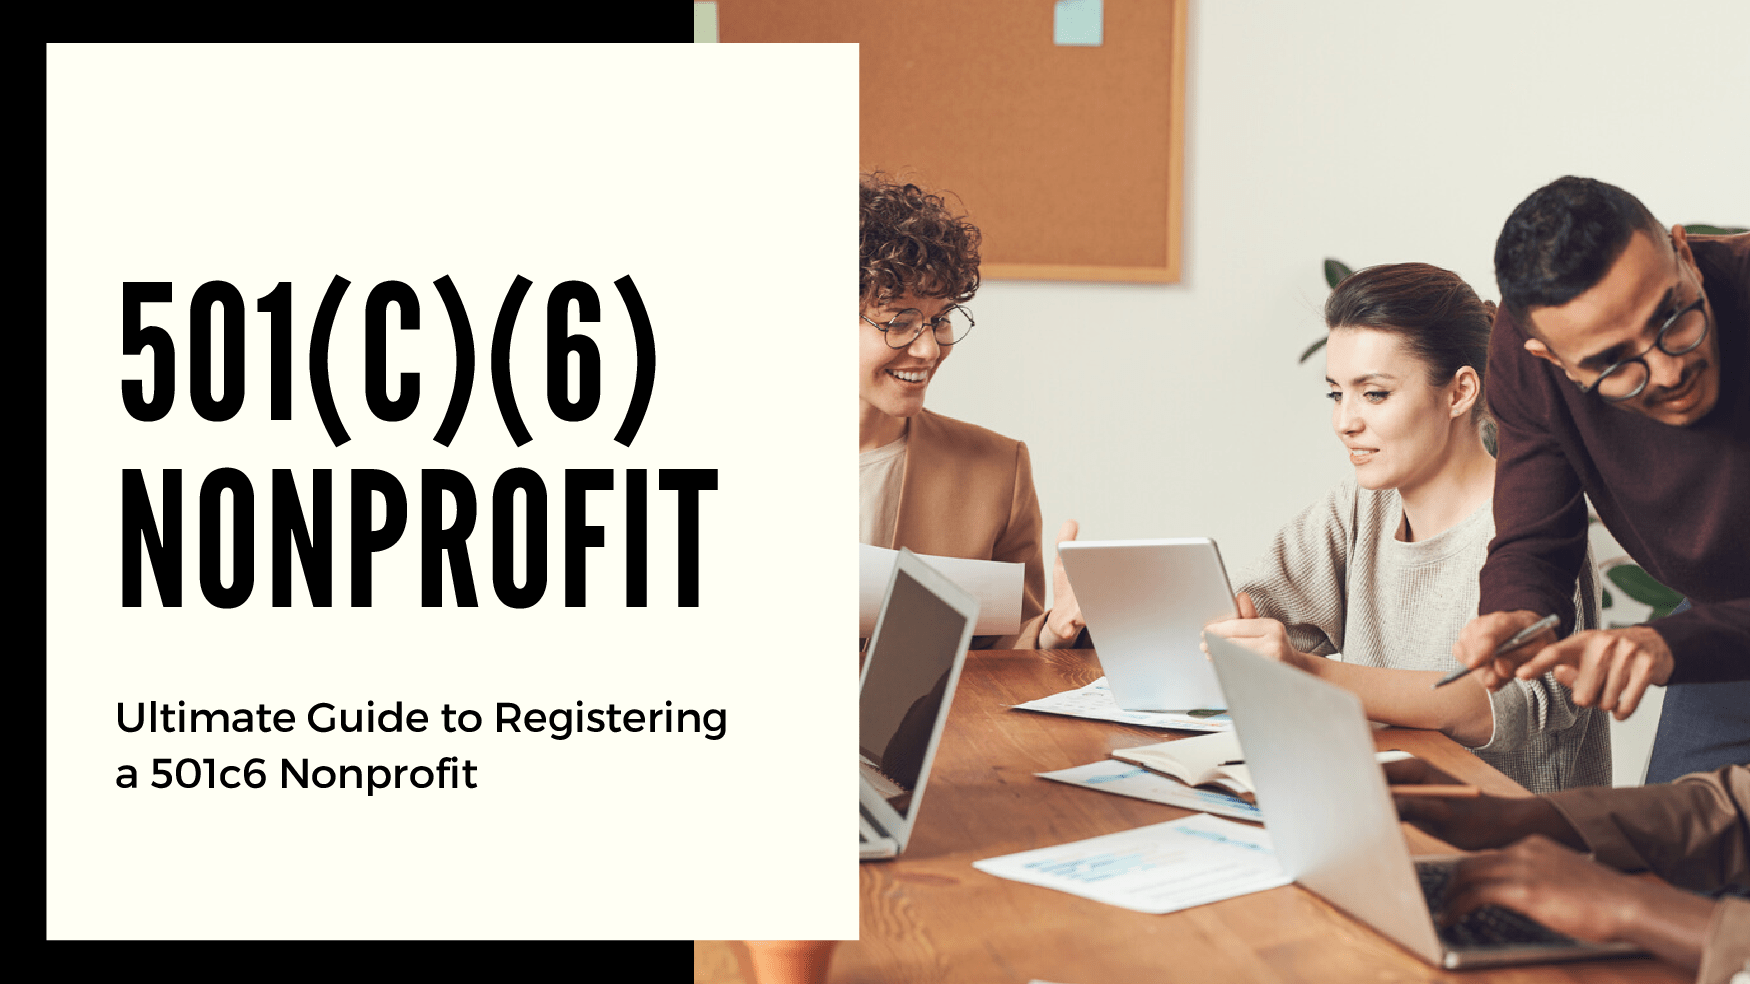 How to Start a 501c6: Ultimate Guide to Registering a 501c6 Nonprofit